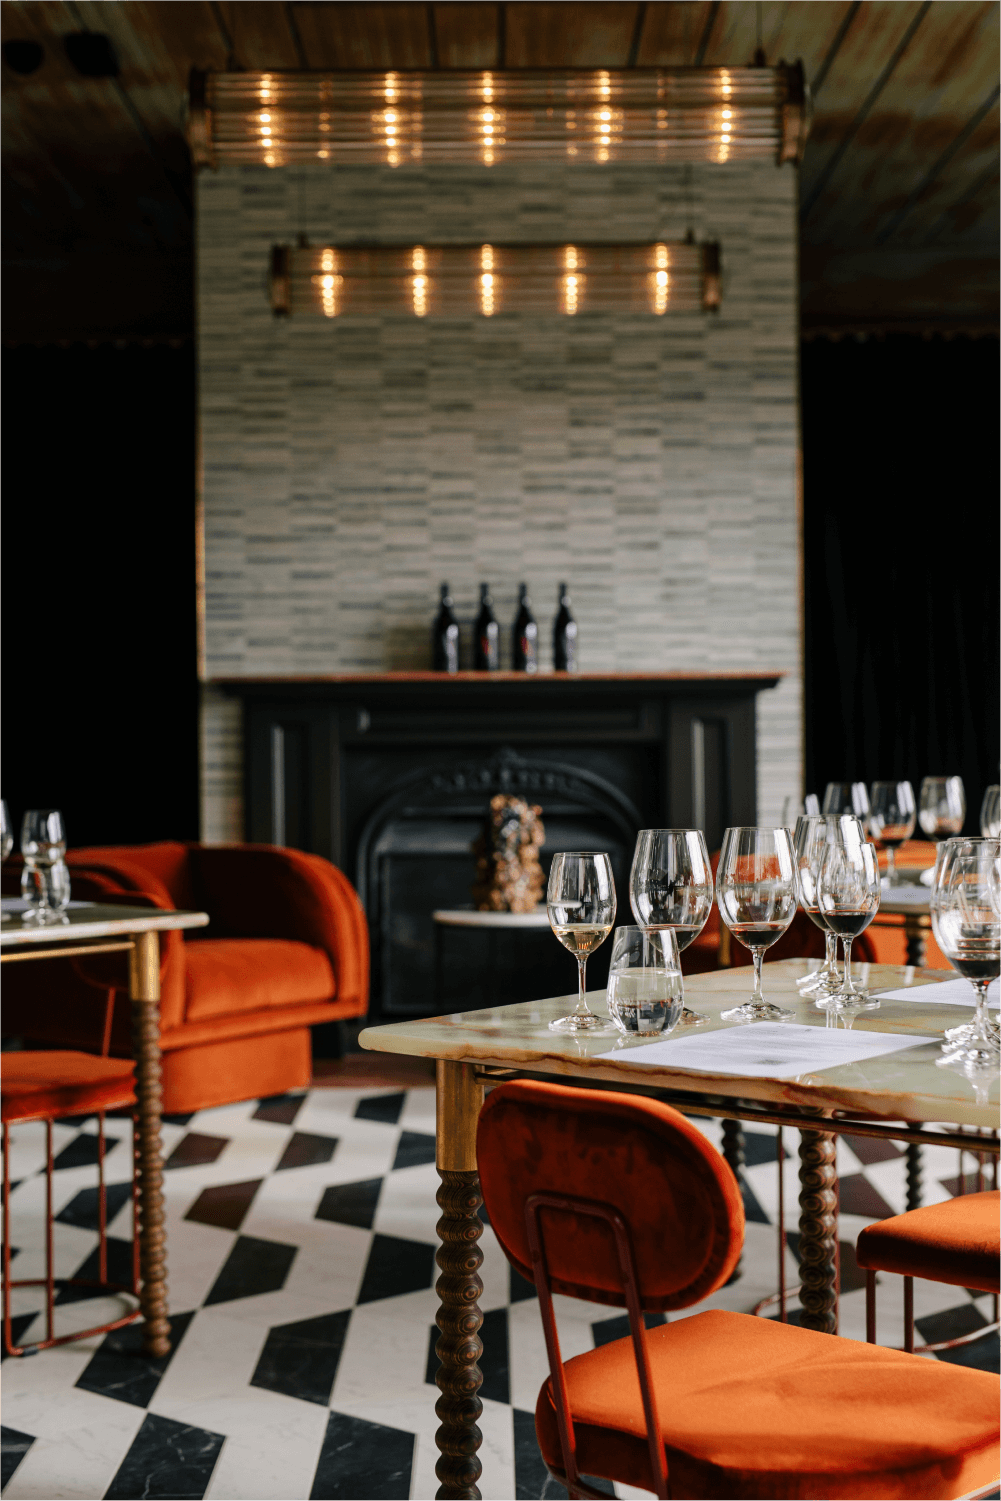 Interior of Domaine A. A fireplace, soft lighting, orange velvet chairs and marble table tops with glasses filled ready for tasting